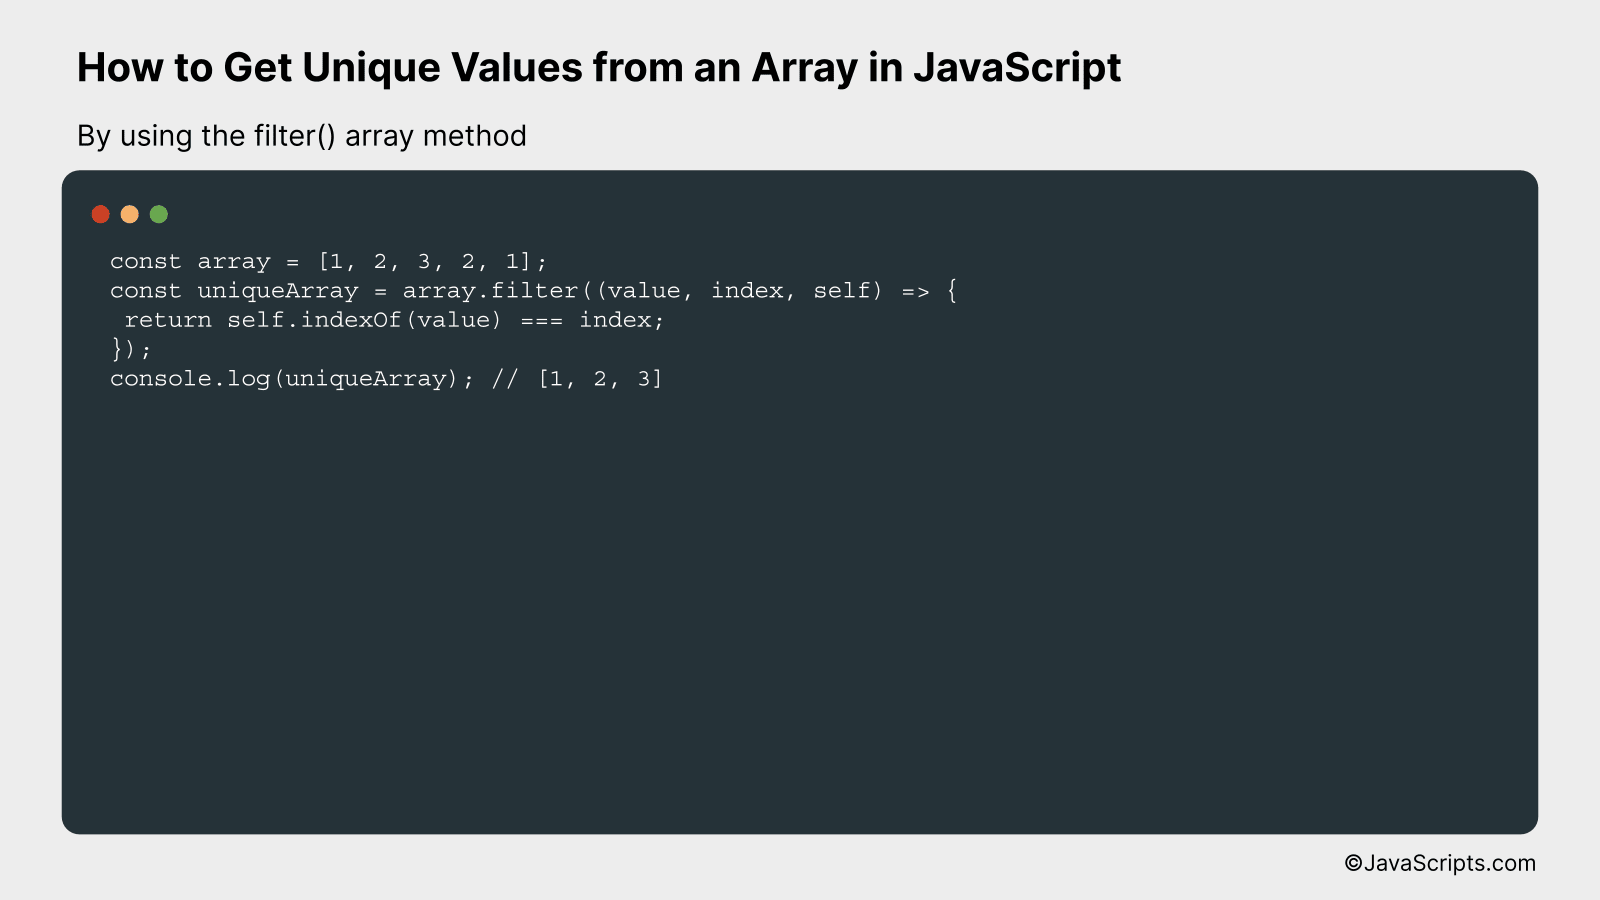 By using the filter() array method